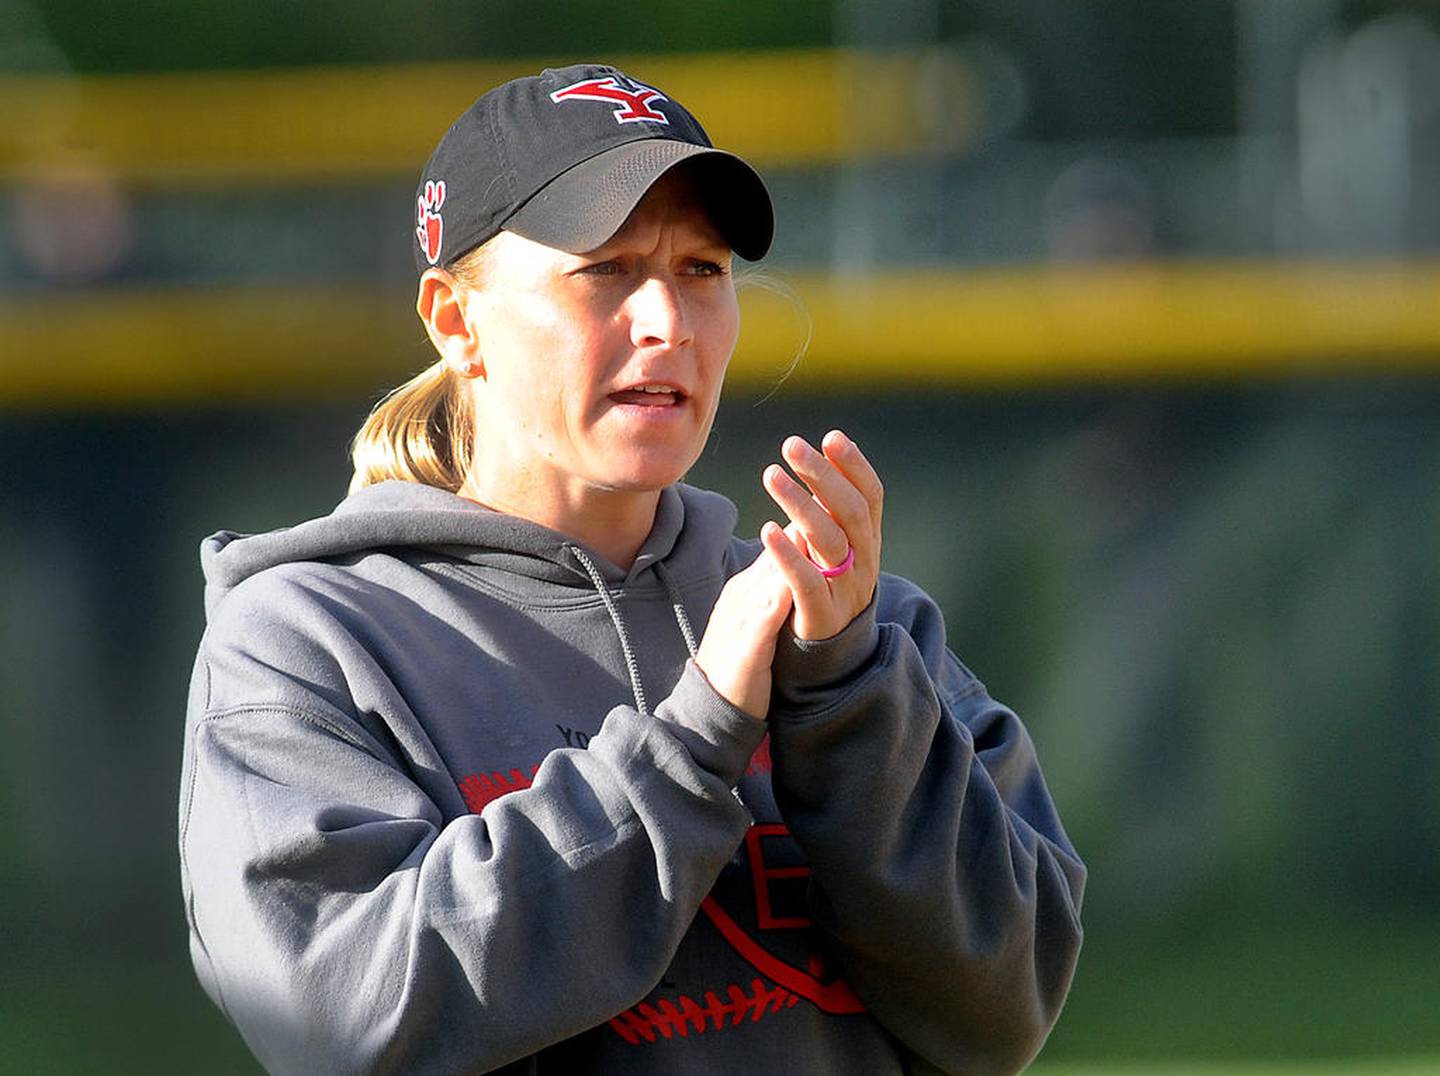 Yorkville head coach Jory Regnier cheers on her batter during a varsity softball game agasint Kaneland at Yorkville High School on Thursday, April 20, 2017.